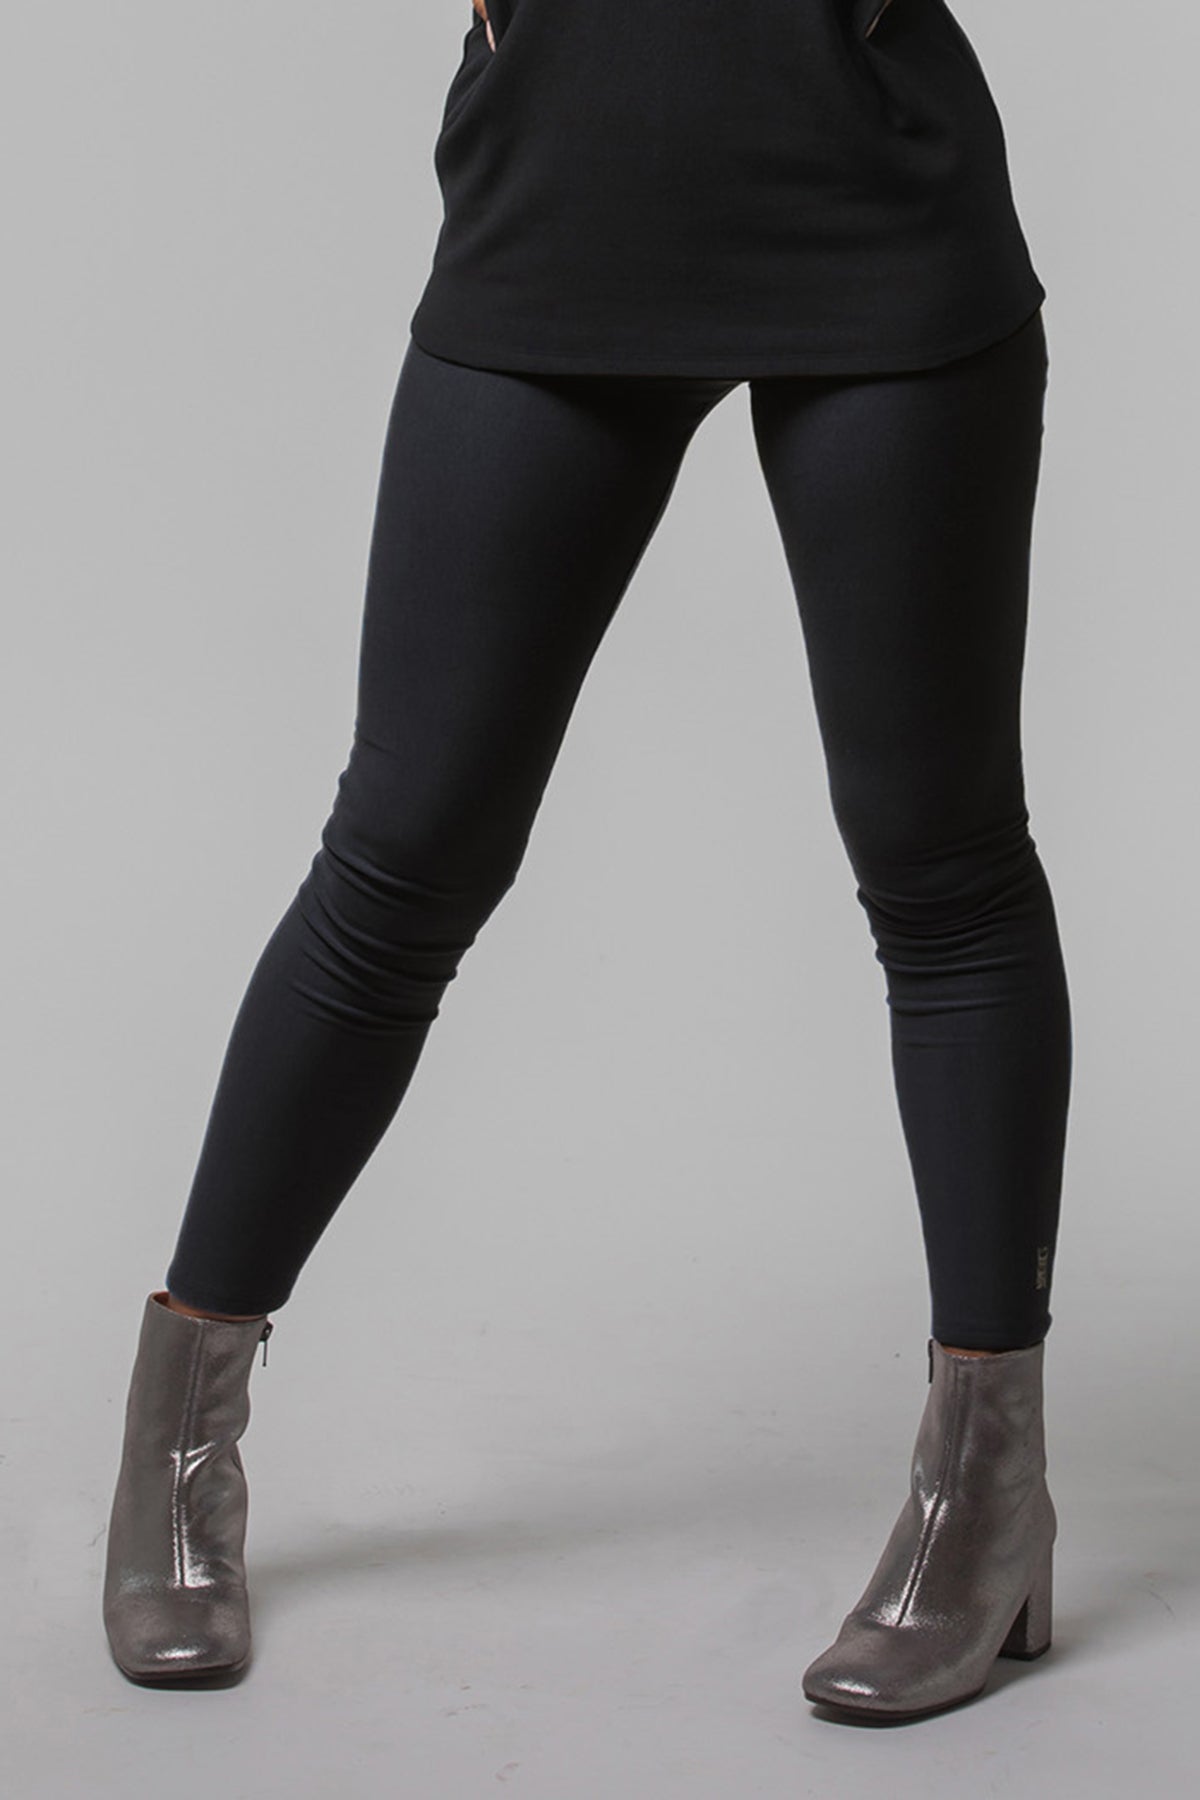 Elsa Bamboo Leggings with pockets - Melodia Designs